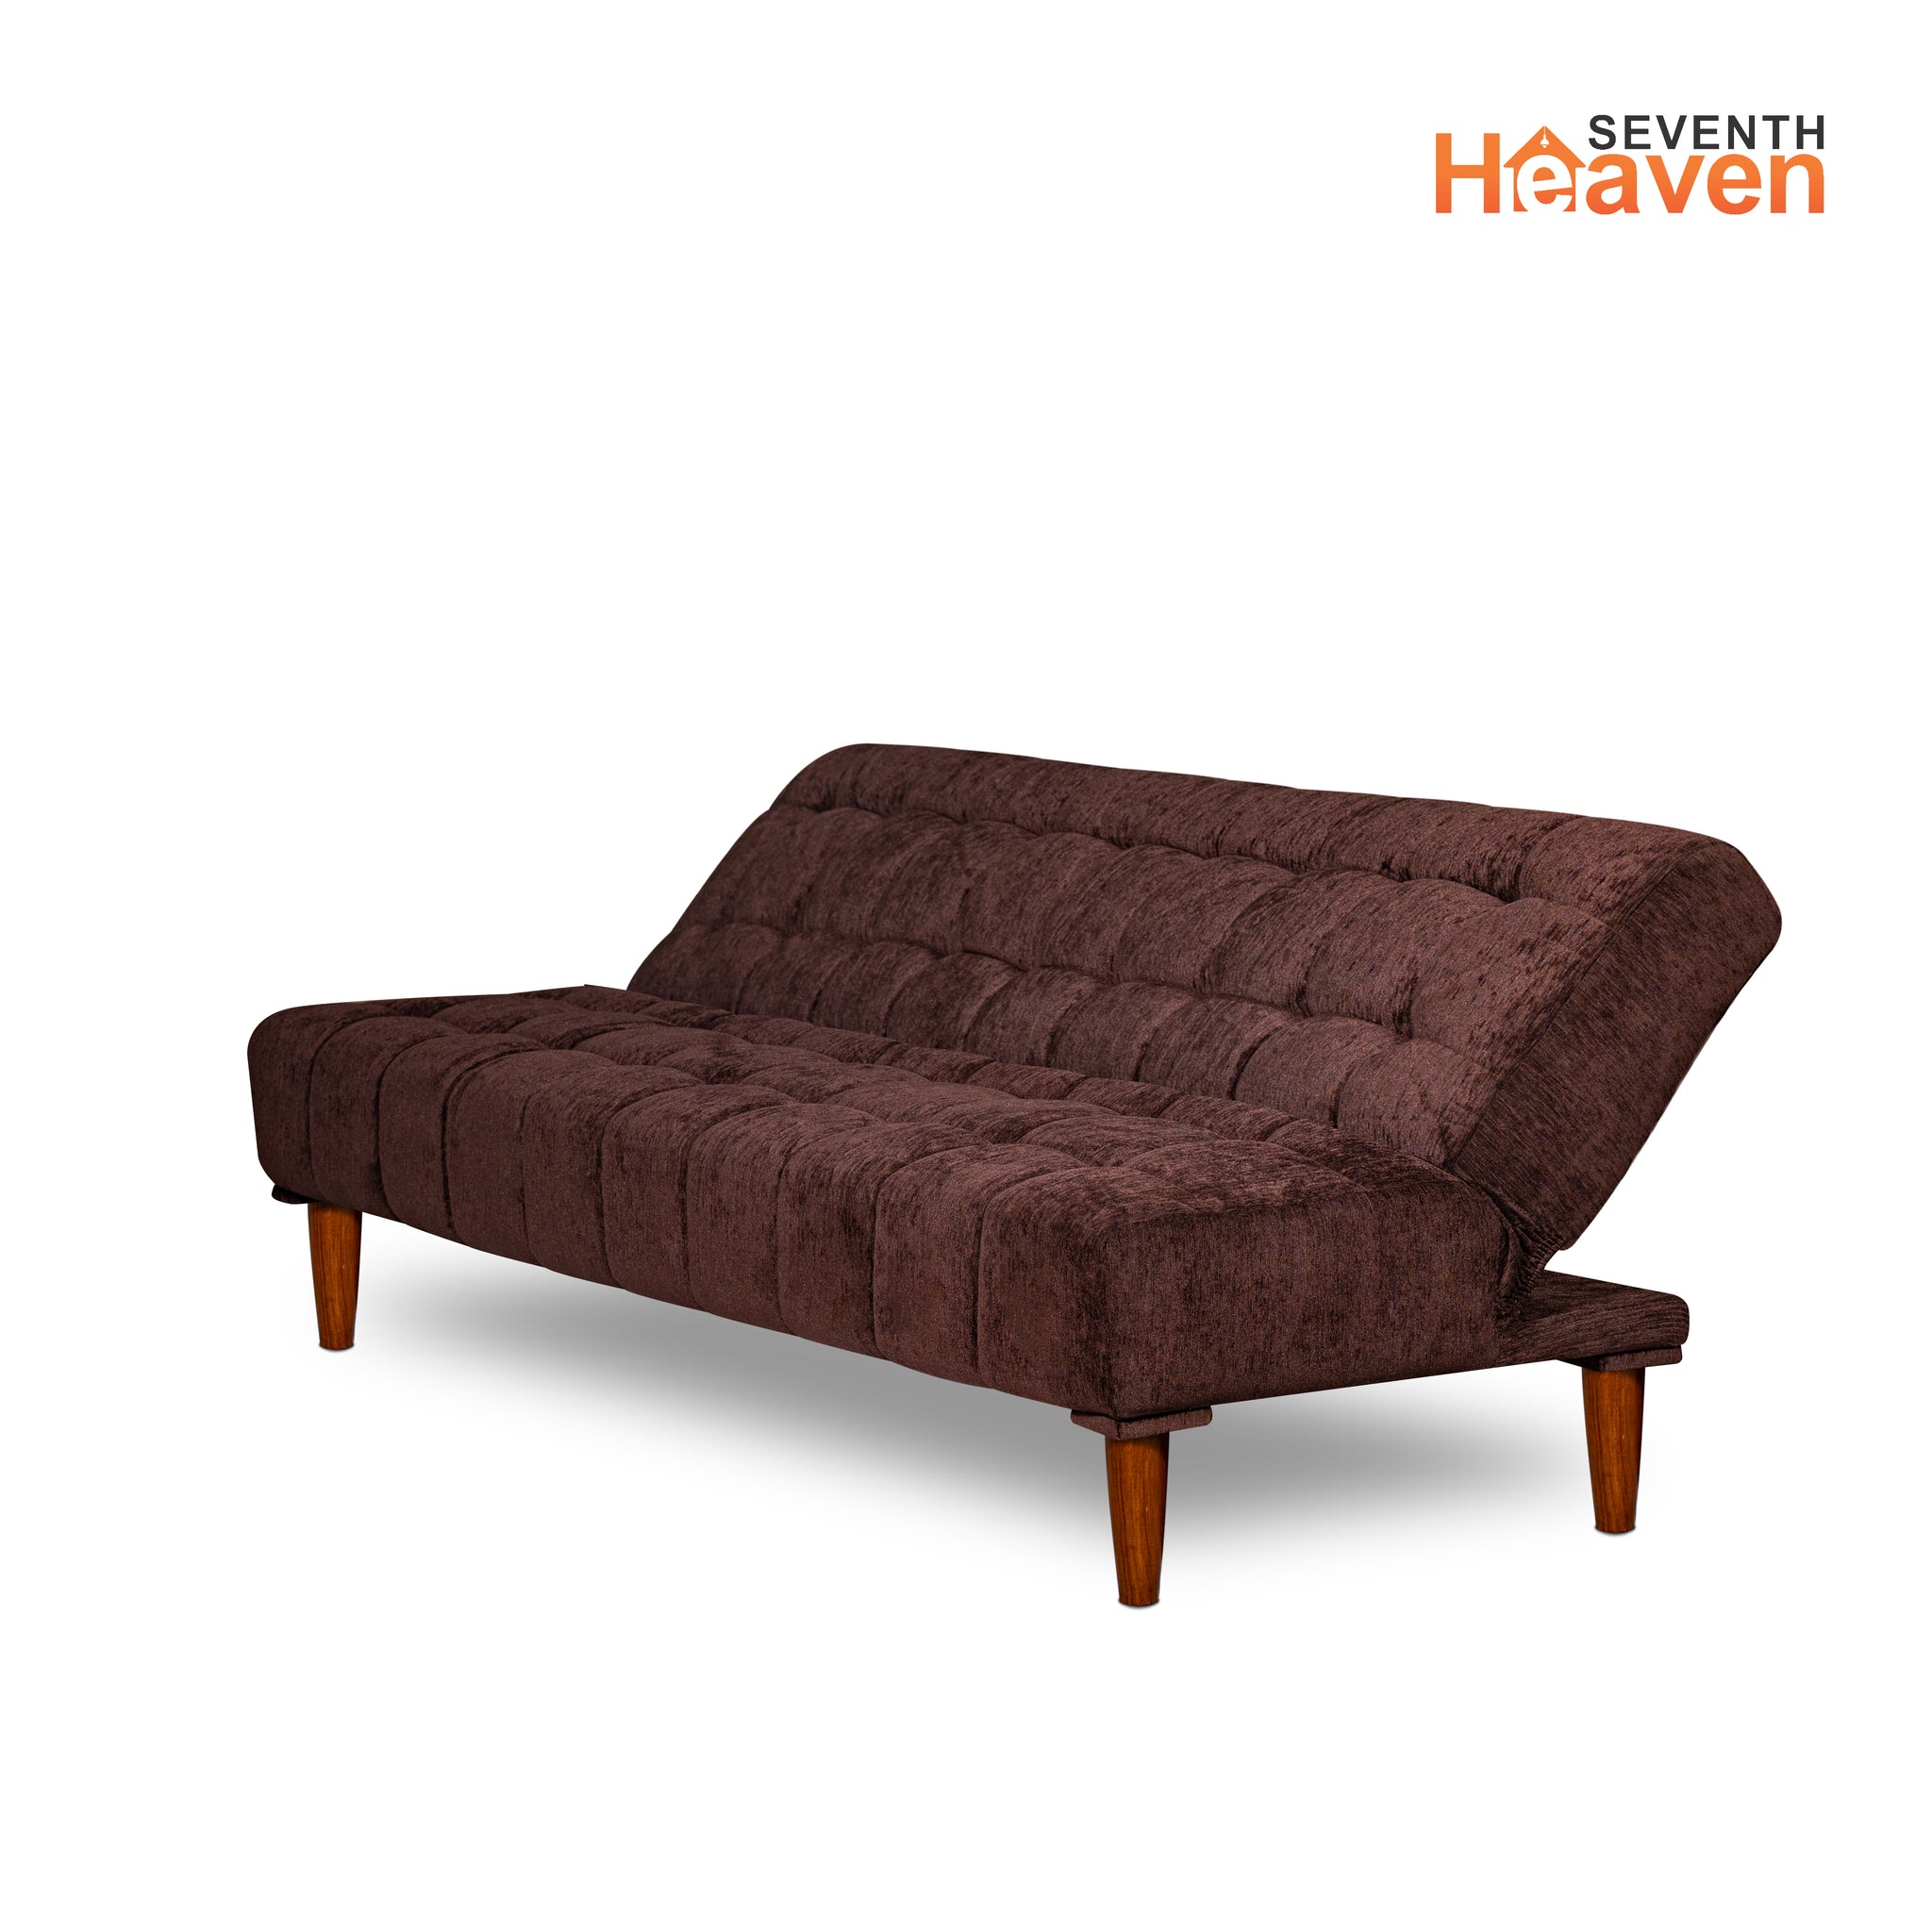 Seventh Heaven Florida Neo 4 Seater Wooden Sofa Cum Bed Modern & Elegant Smart Furniture Range for luxurious homes, living rooms and offices. Use as a sofa, lounger or bed. Perfect for guests. Molphino fabric with sheesham polished wooden legs. Brown colour.